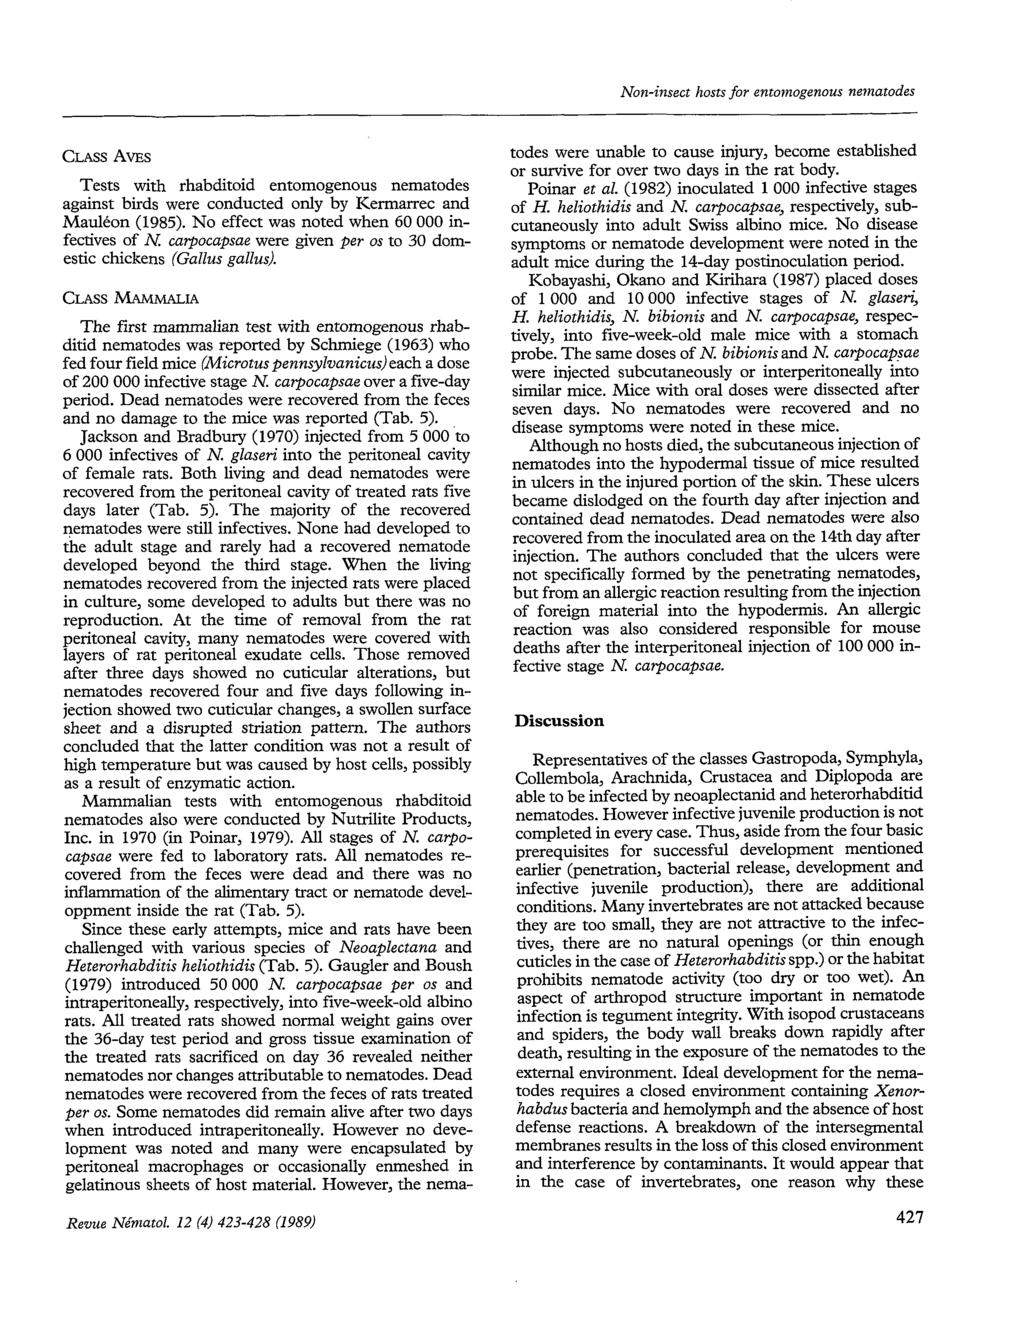 Non-insec hoss for enomogenous nemaodes CLASS AVES Tess wih rhabdioid enomogenous nemaodes agains birds were conduced only by Kermarrec and Mauléon (1985).